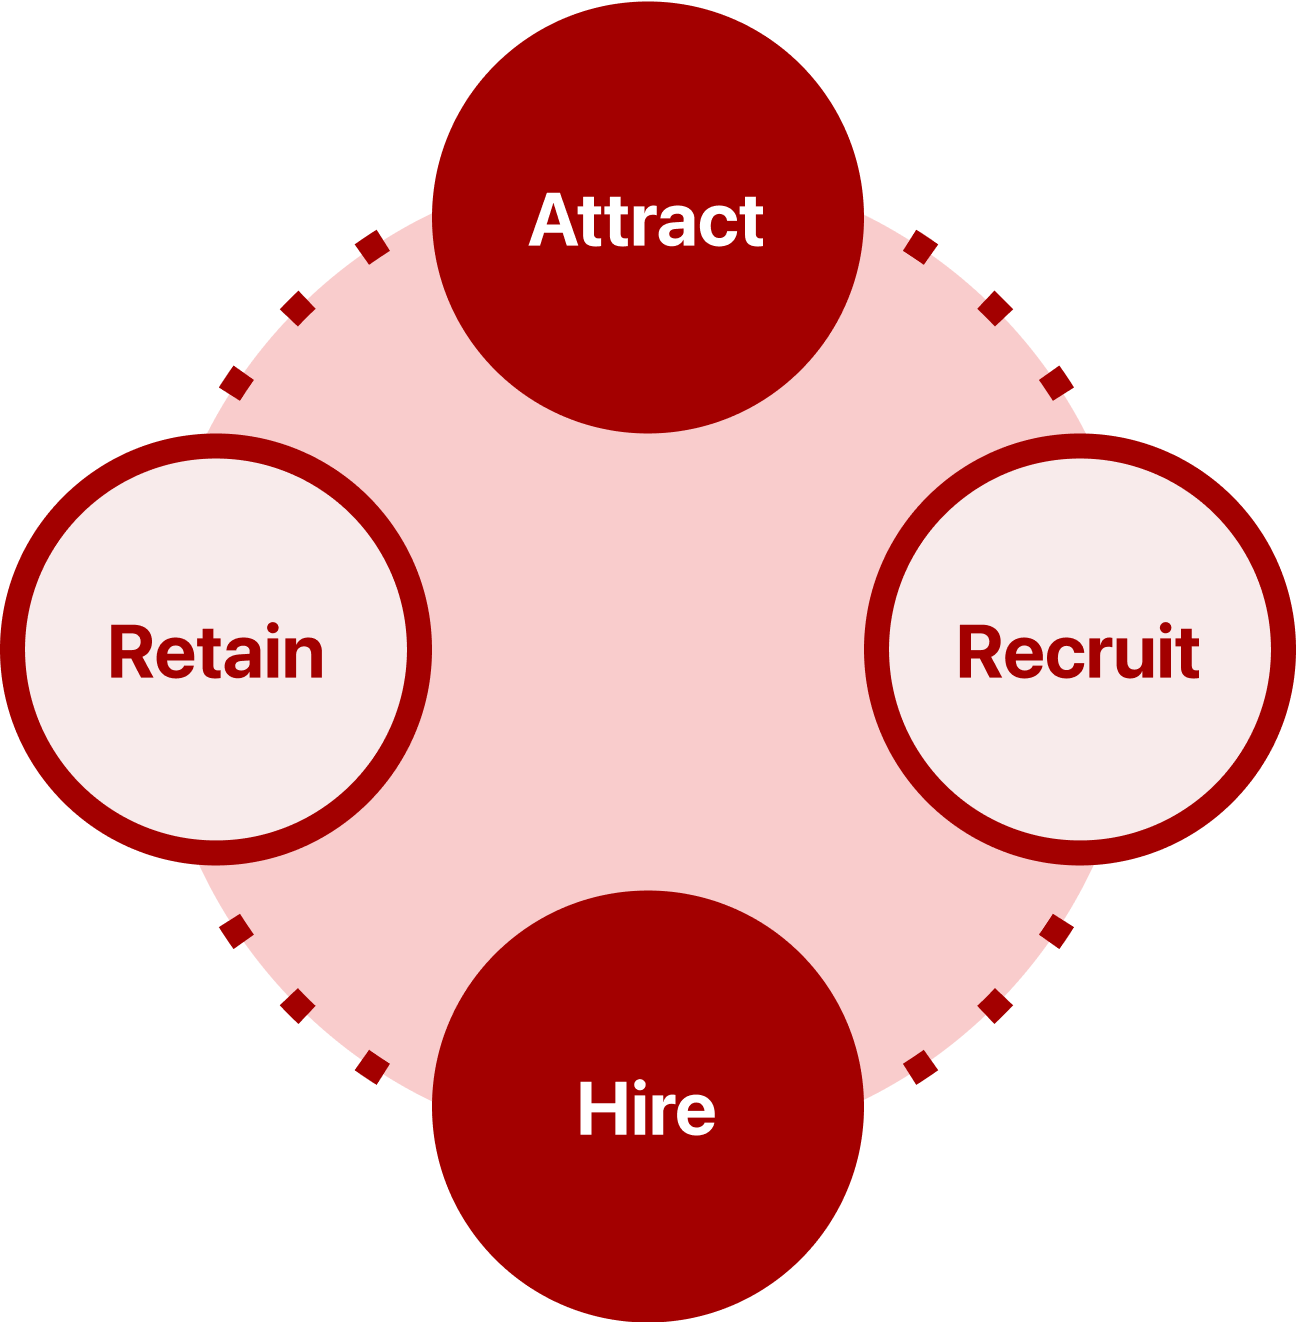 Attract, retain, recruit and hire